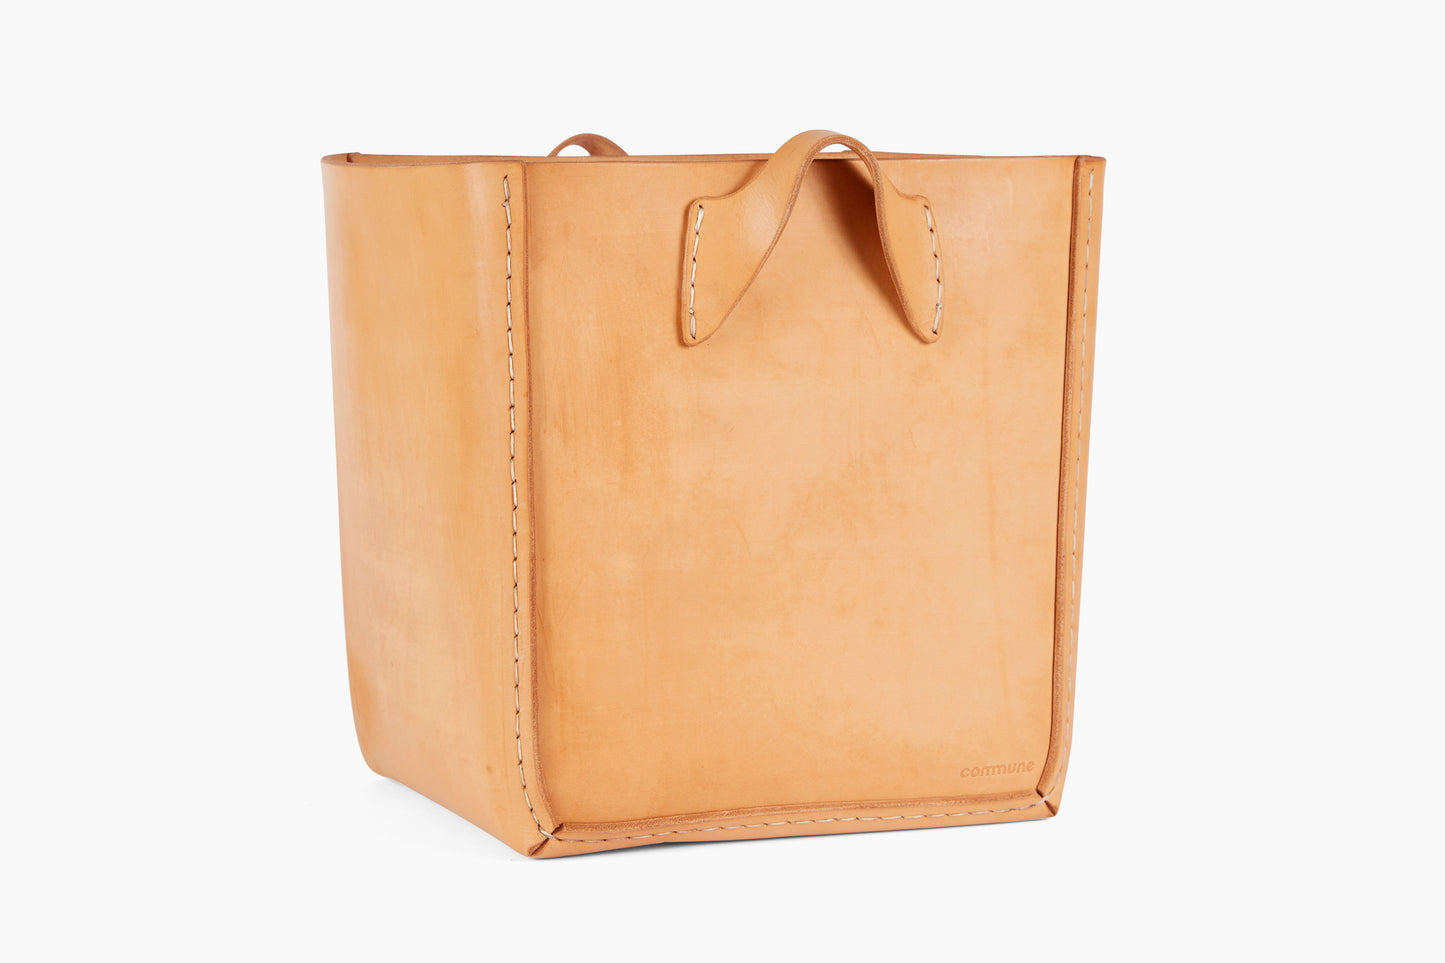 Andrew McAteer for Commune Large Square Leather Basket